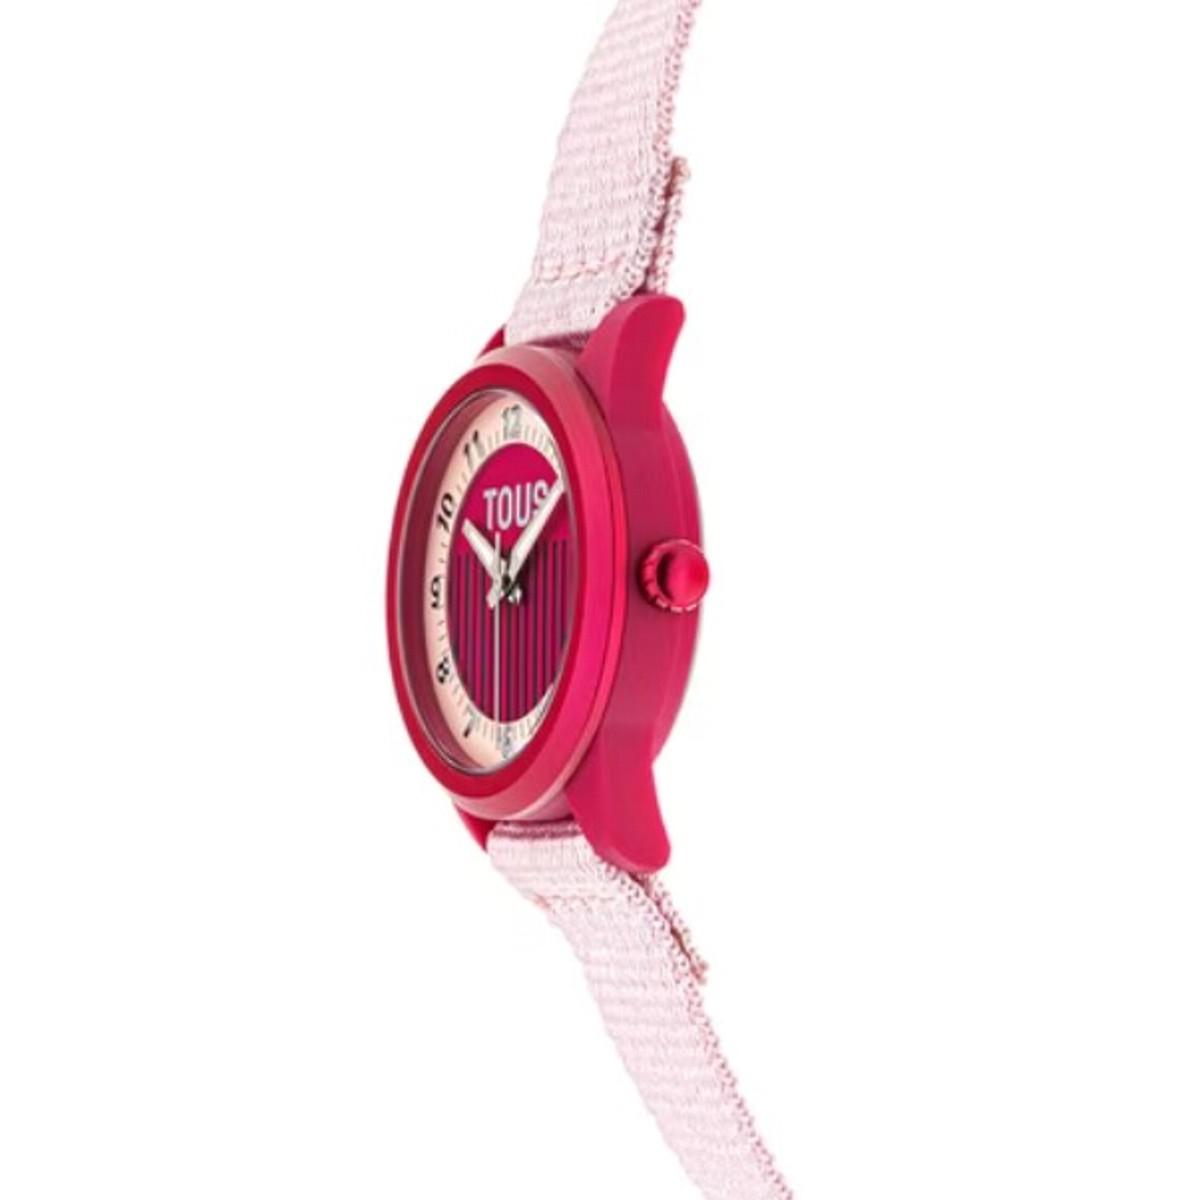 PINK VIBRANT SUN TOUS WATCH FOR KIDS 200351086